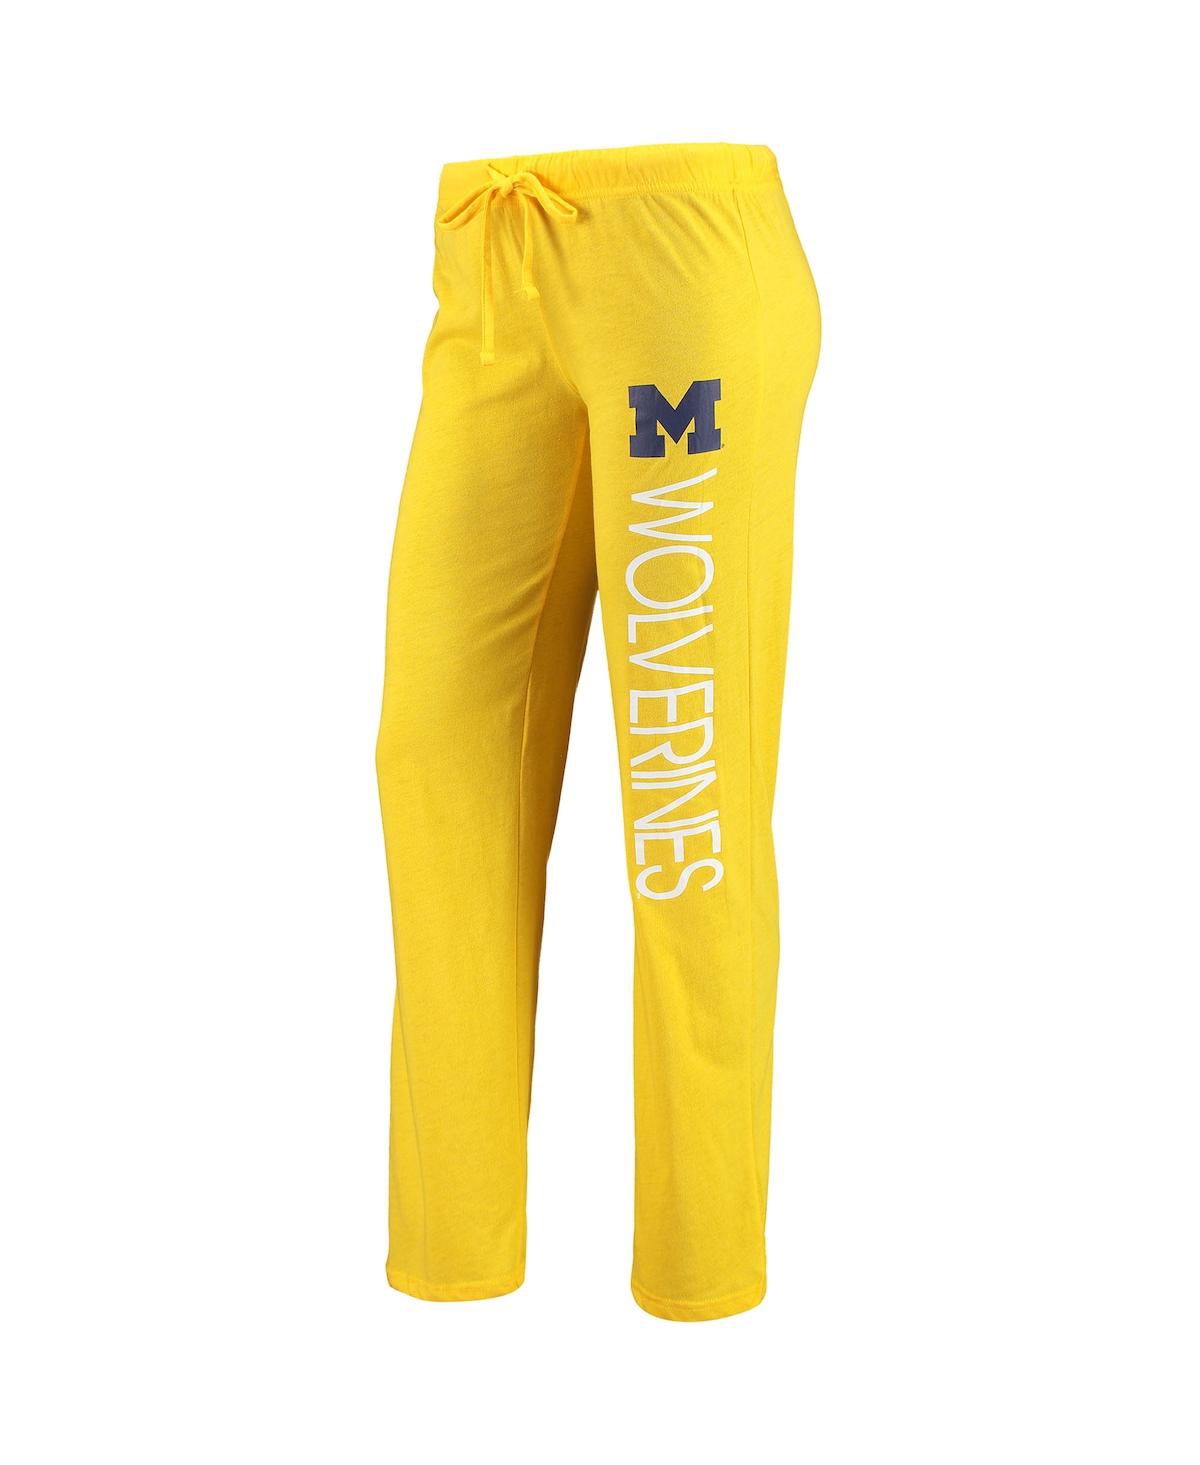 Shop Concepts Sport Women's  Maize, Navy Michigan Wolverines Tank Top And Pants Sleep Set In Maize,navy